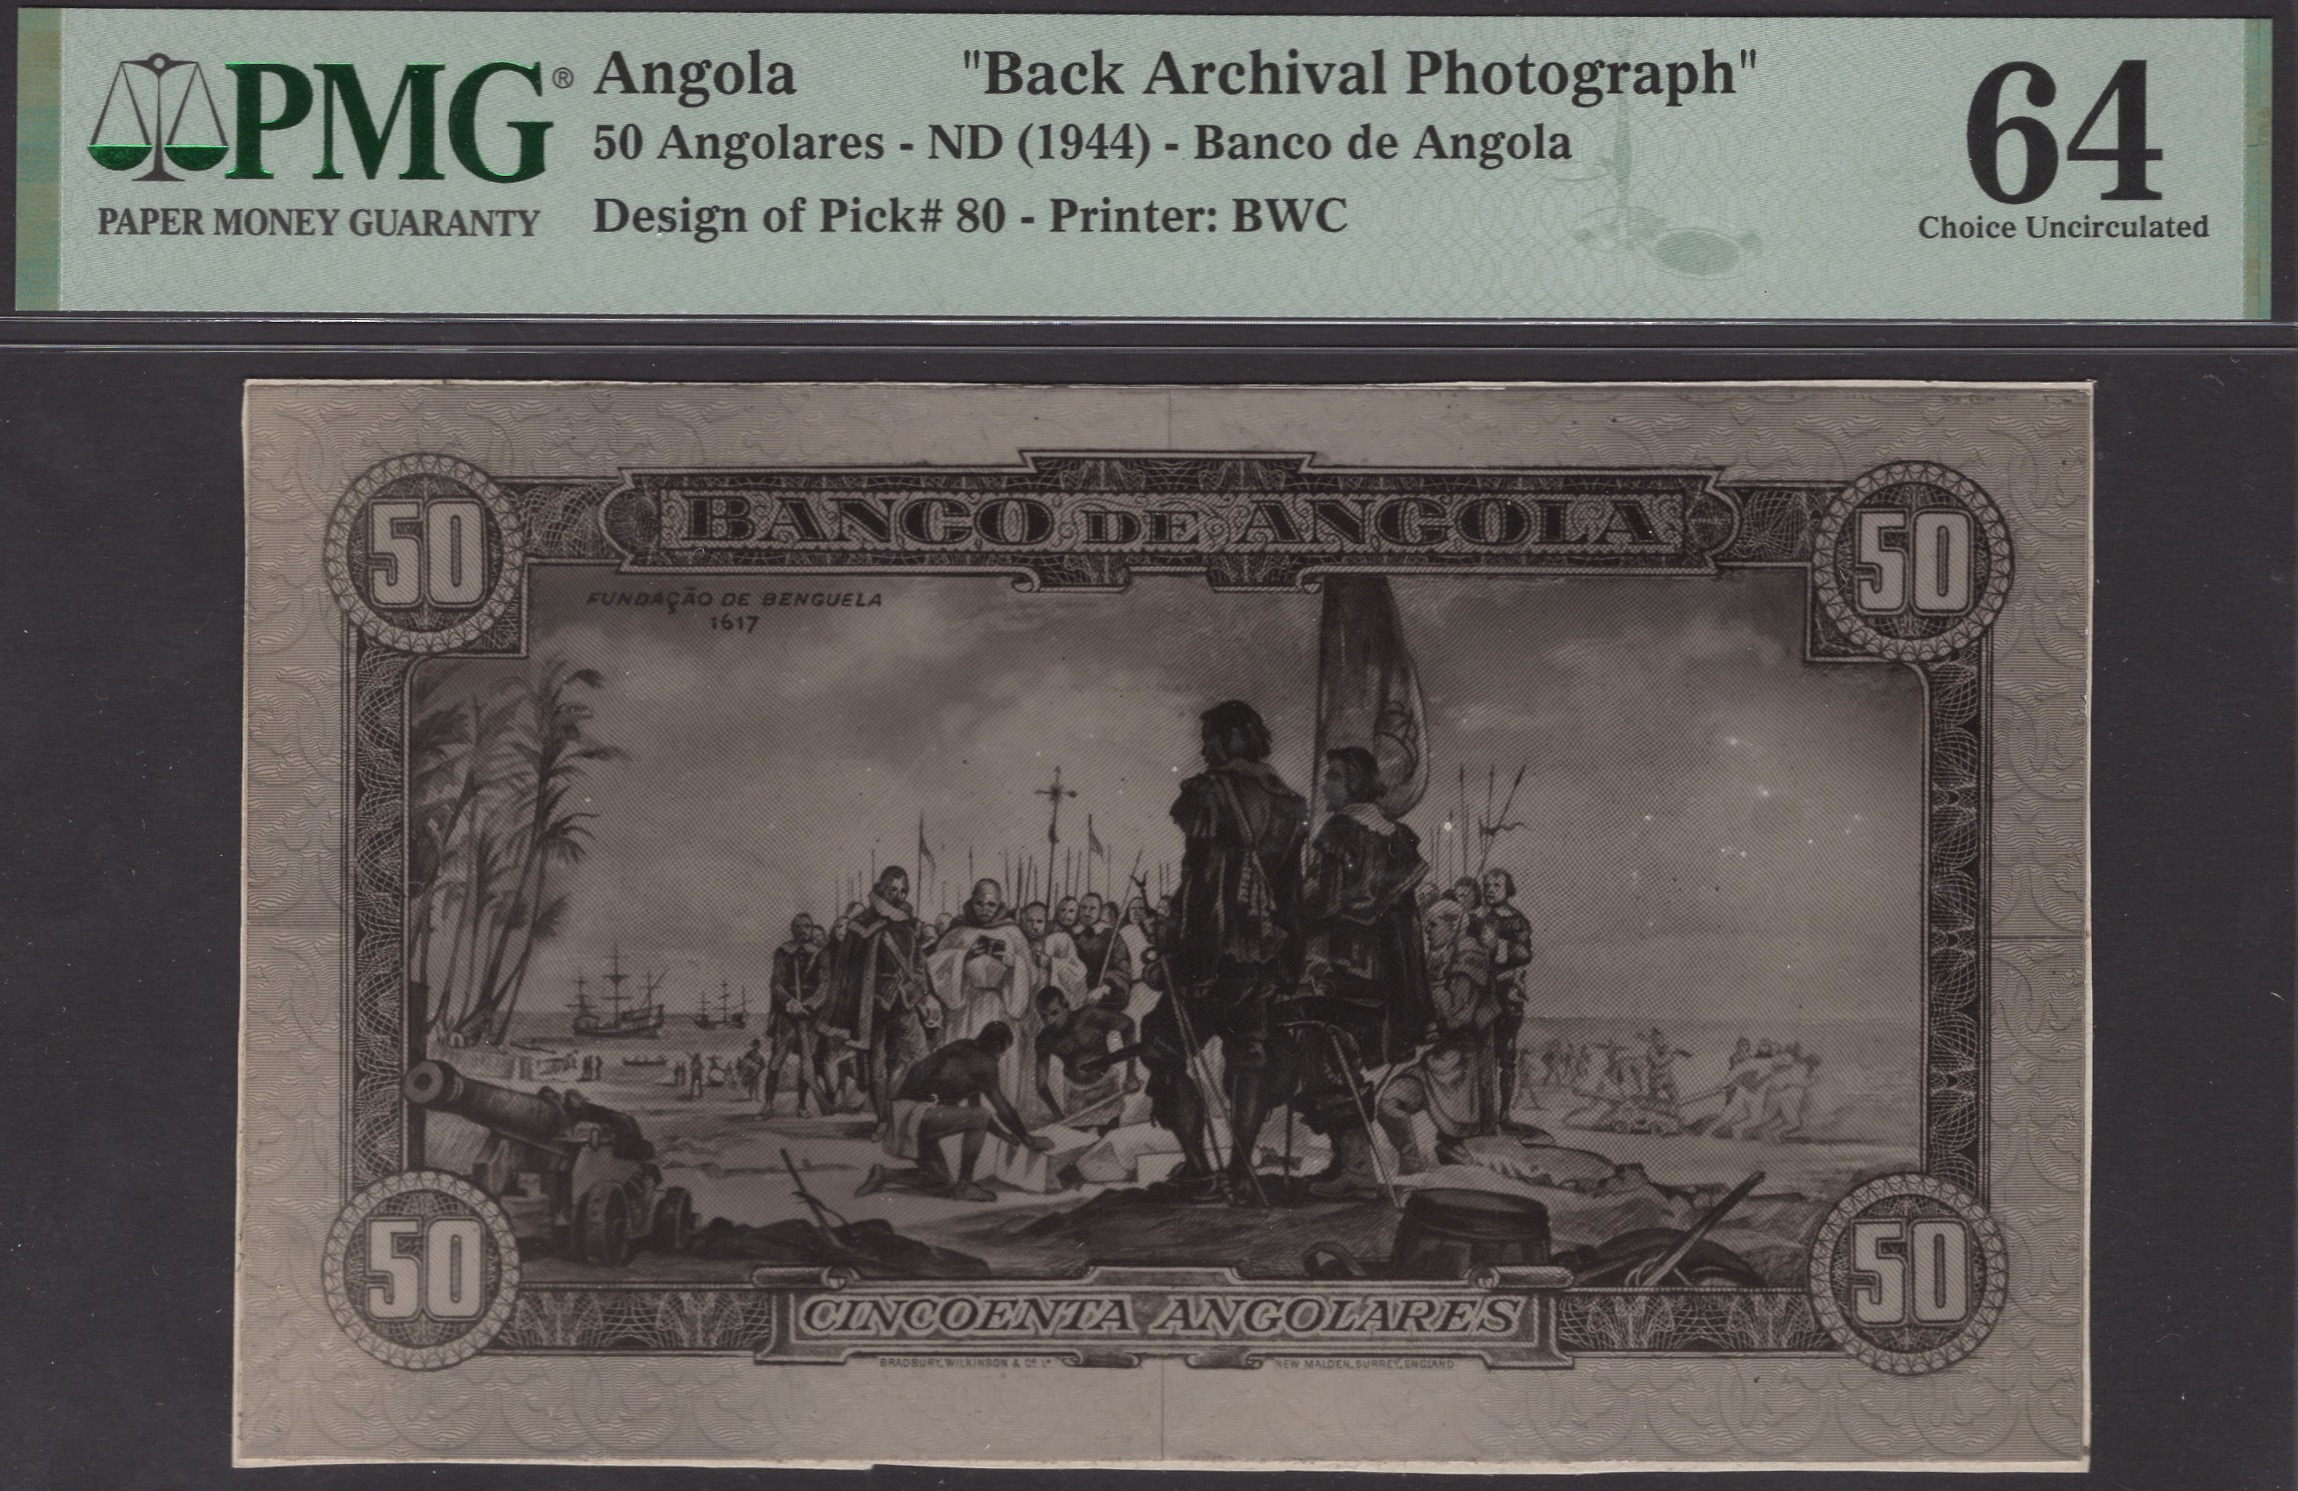 Banco de Angola, obverse and reverse monochrome photographs showing designs for the 50... - Image 3 of 4